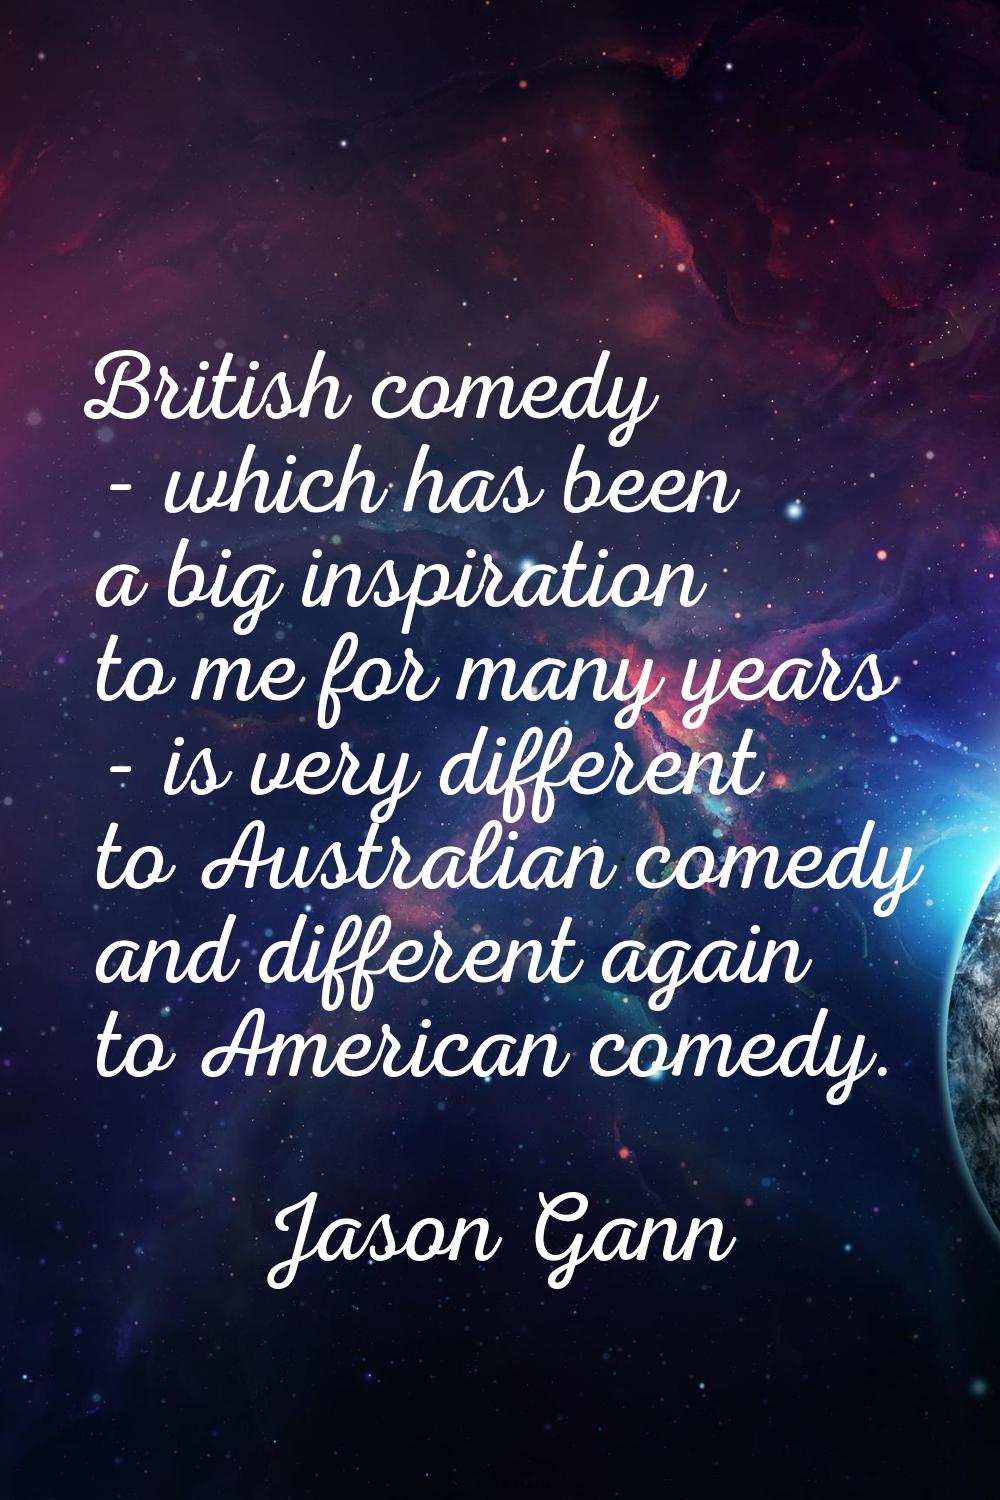 British comedy - which has been a big inspiration to me for many years - is very different to Austr